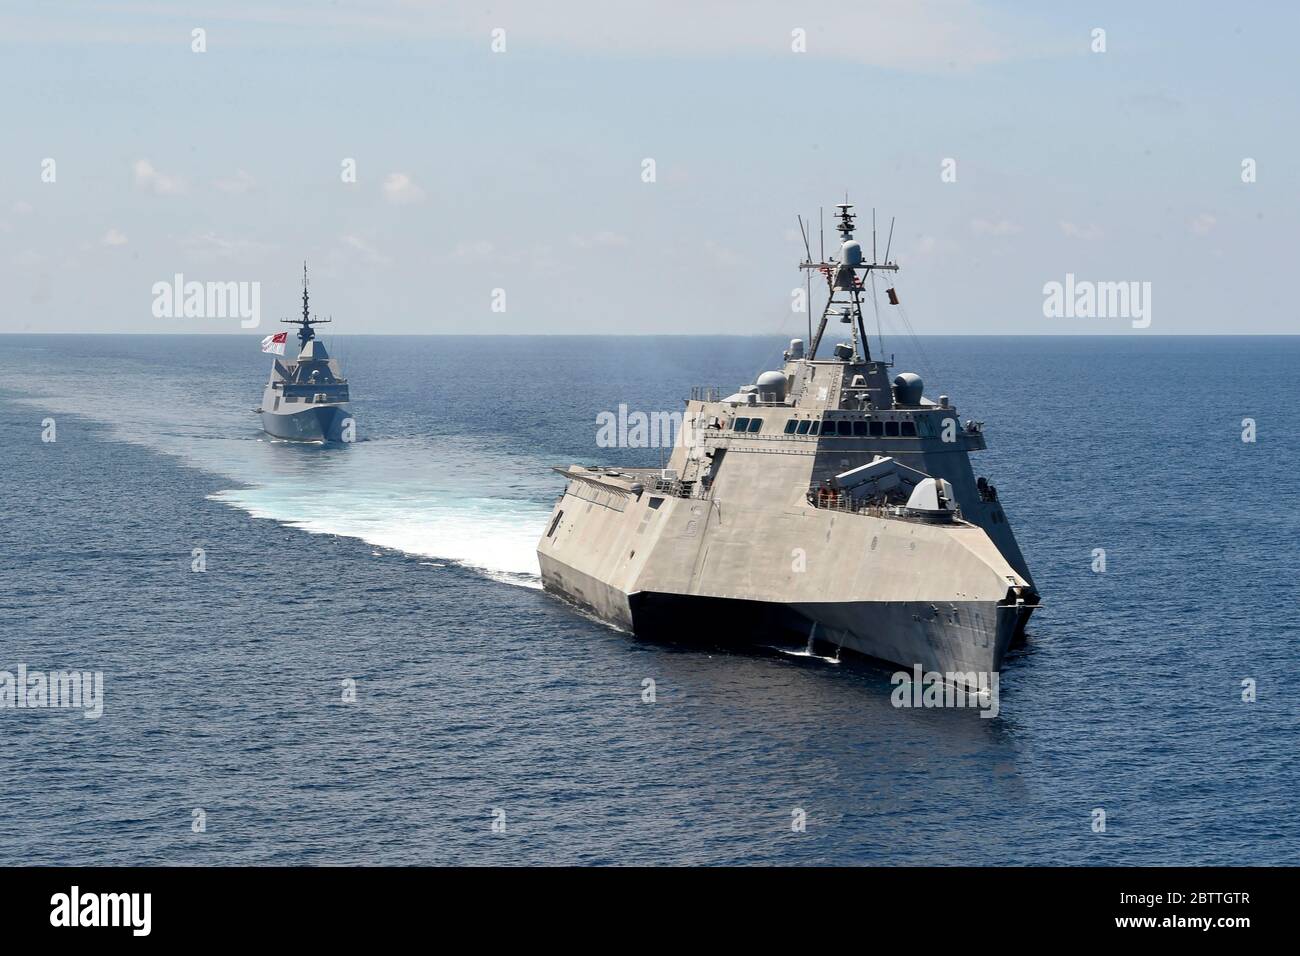 The U.S. Navy Independence-variant littoral combat ship USS Gabrielle Giffords patrols alongside the Republic of Singapore Navy Formidable-class multi-role stealth frigate RSS Steadfast, rear, in international waters May 25, 2020 in the South China Sea. Stock Photo